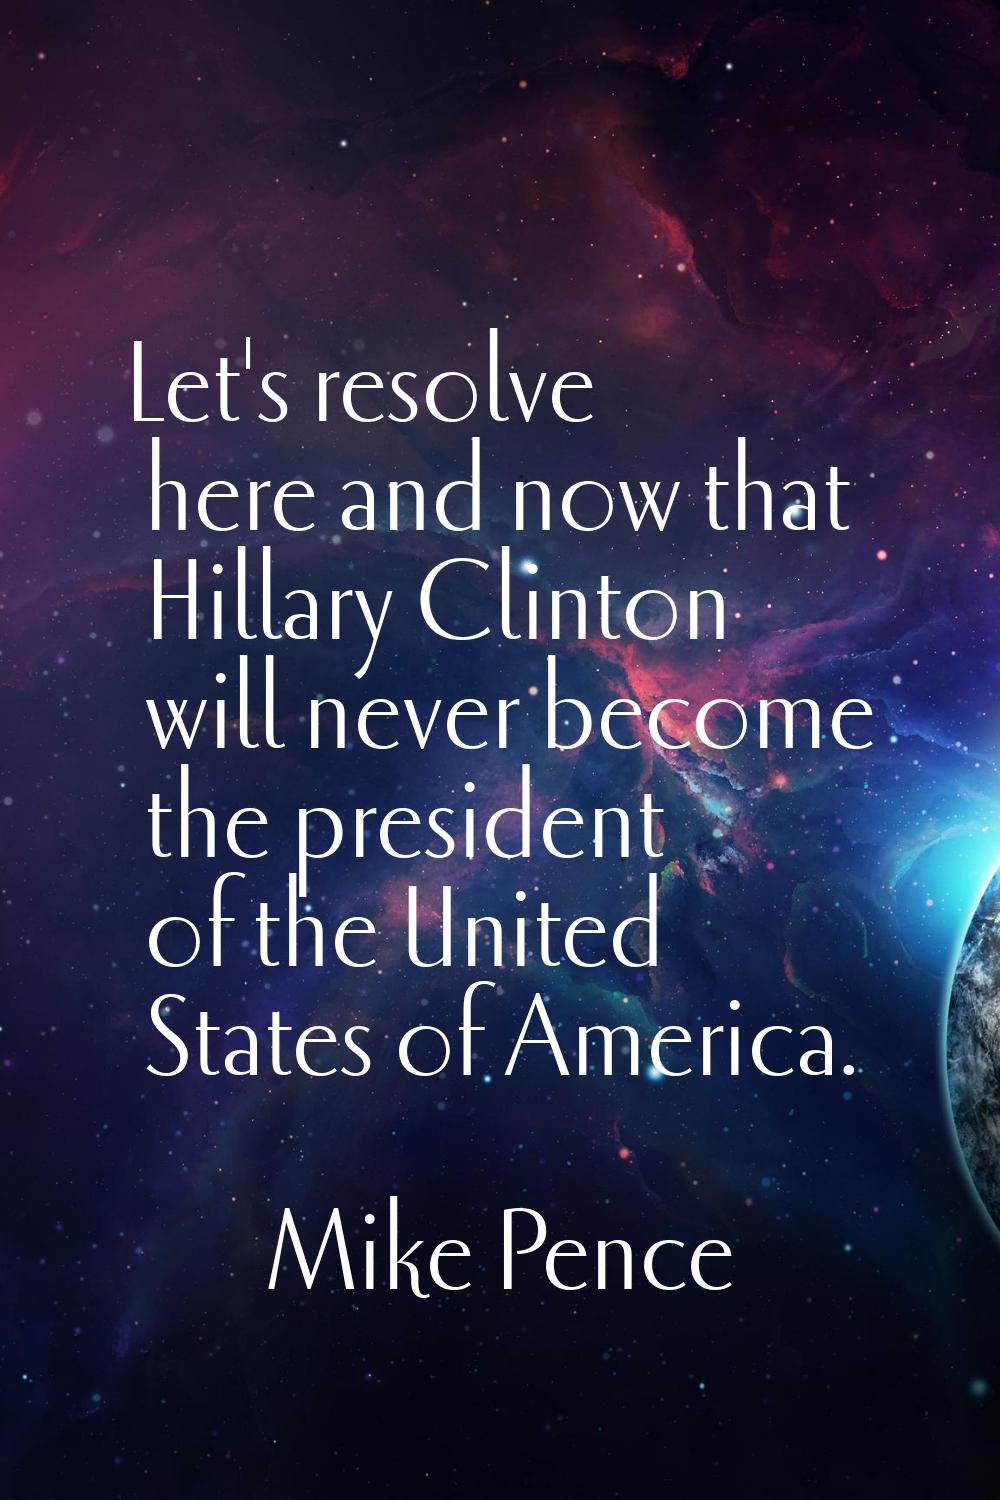 Let's resolve here and now that Hillary Clinton will never become the president of the United State